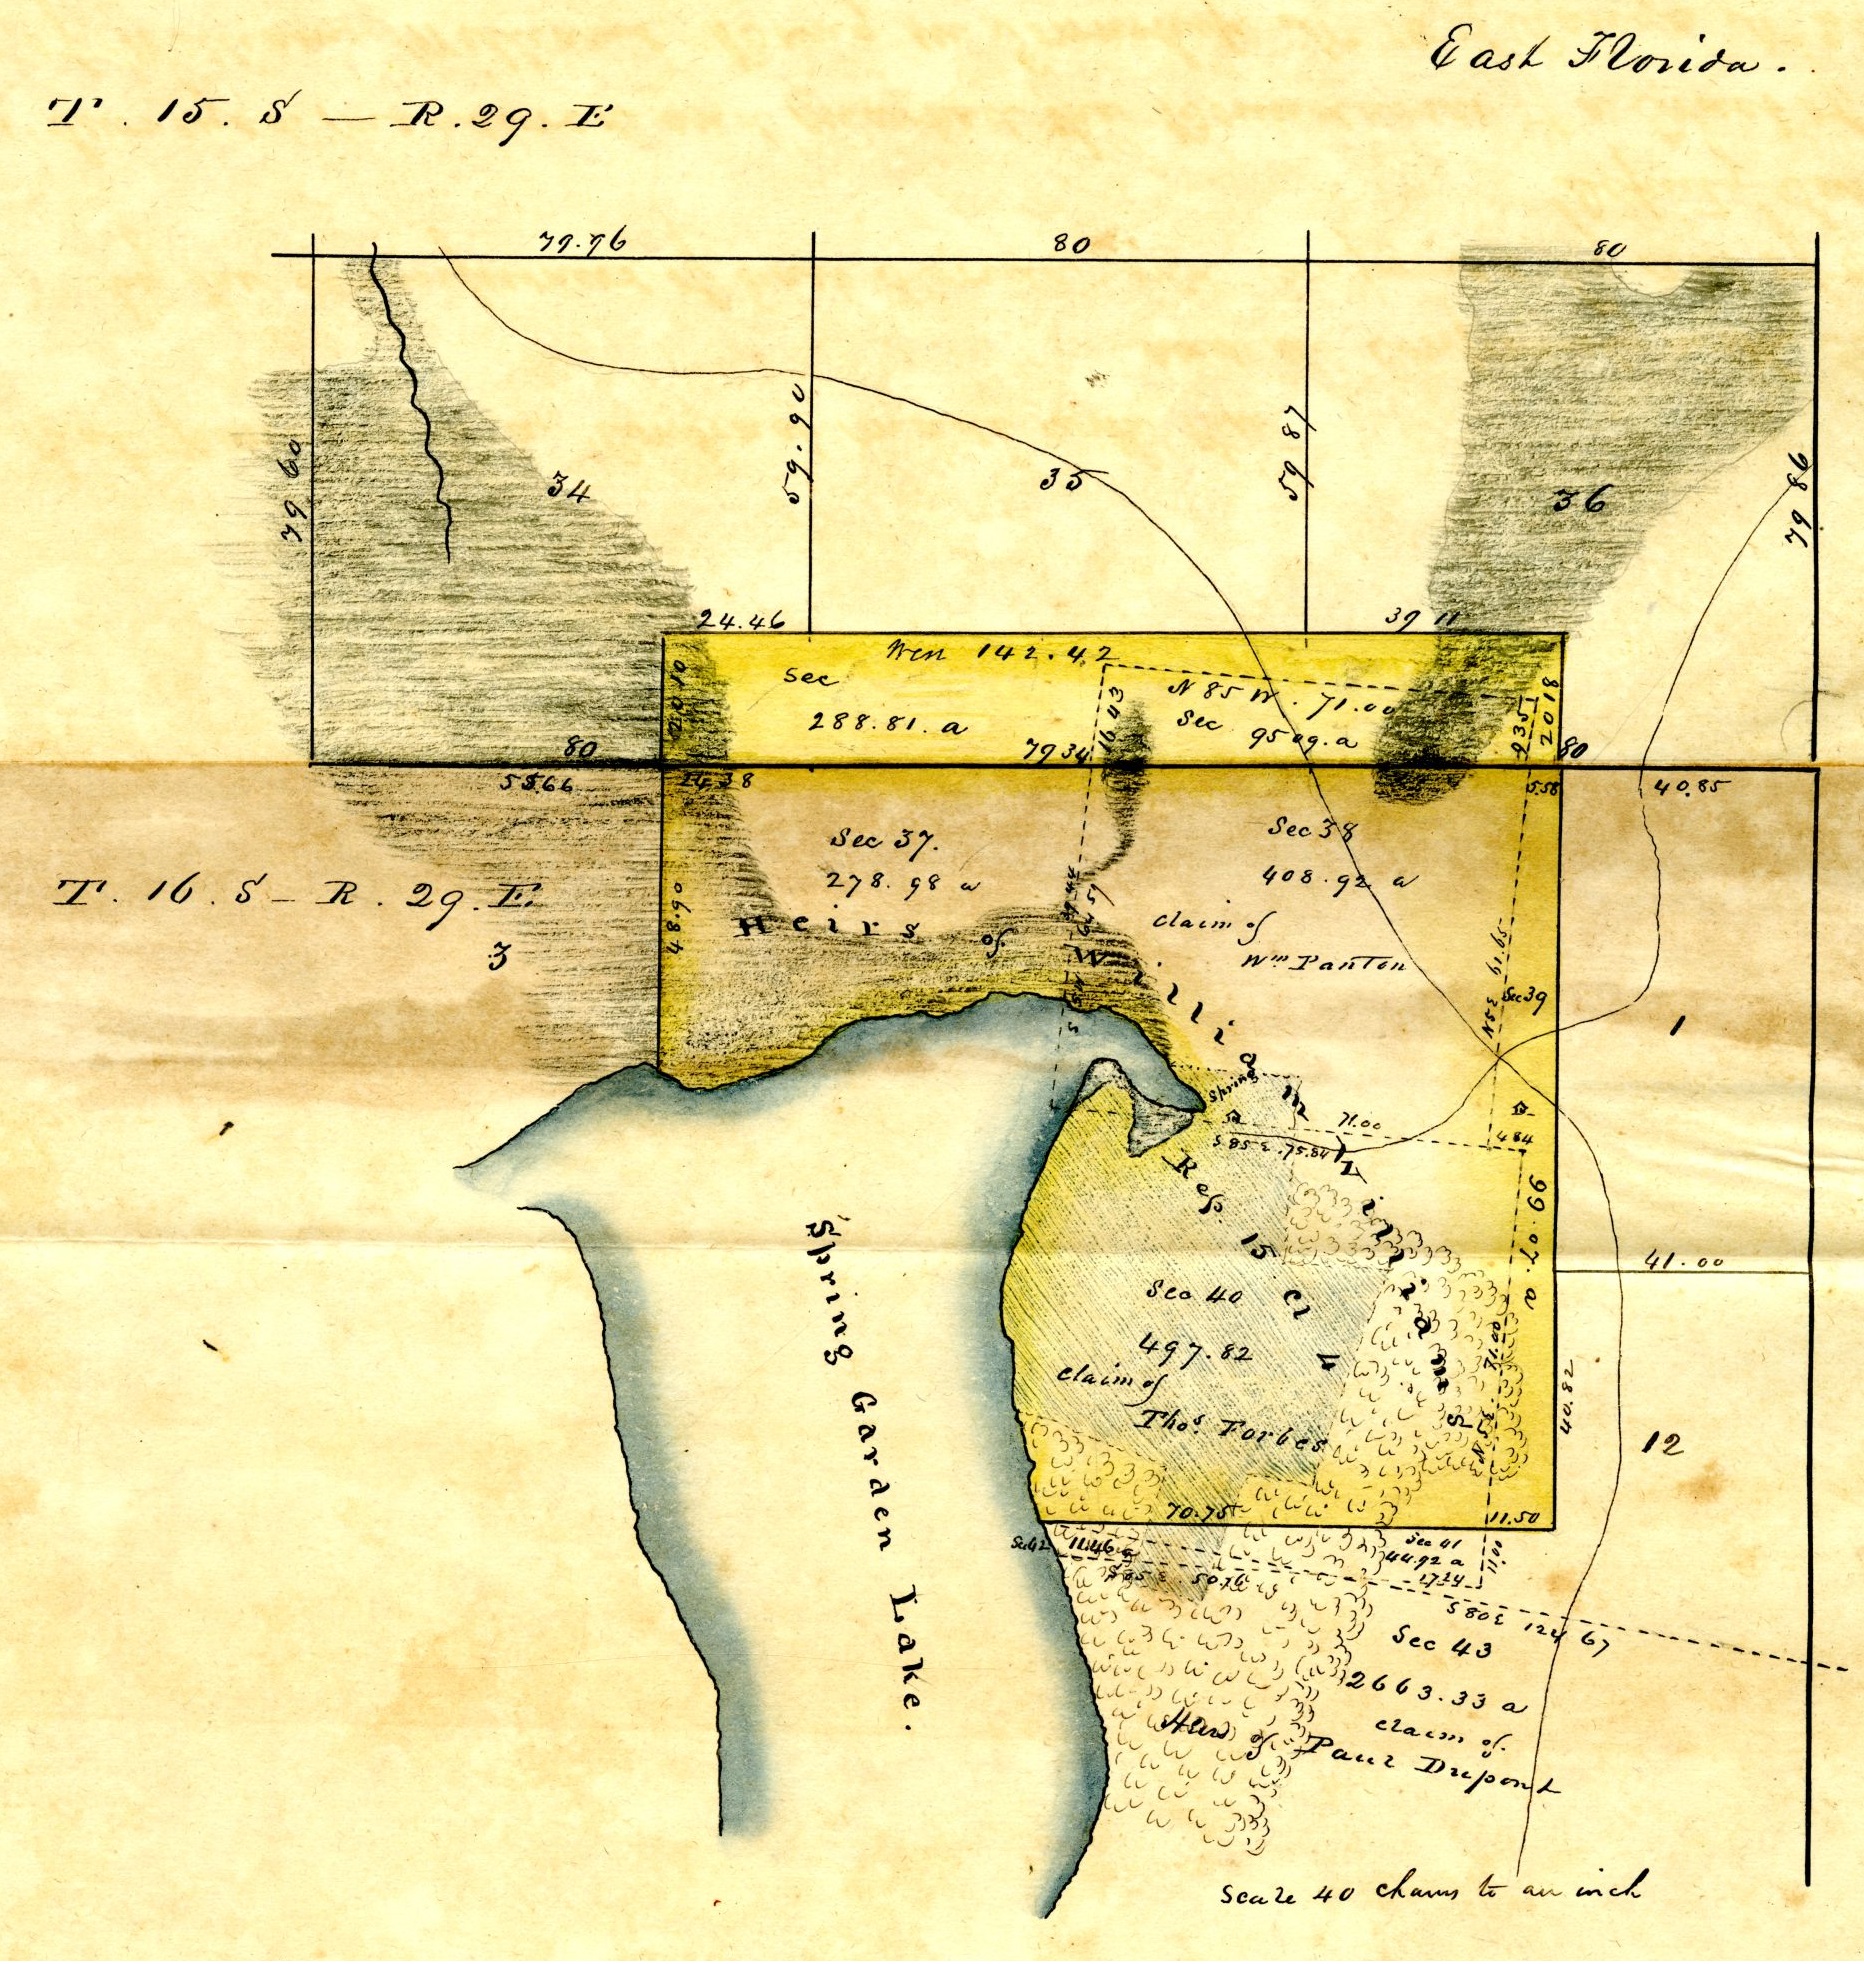 Excerpt of an undated survey plat showing the overlapping land claims of William Williams, William Panton and Thomas Forbes (ca. 1825). Box 34, Folder 7, Confirmed Spanish Land Grants (Series S990), State Archives of Florida. Click or tap the image to view the entire plat and the complete Spanish land grant dossier submitted by the heirs of William Williams.